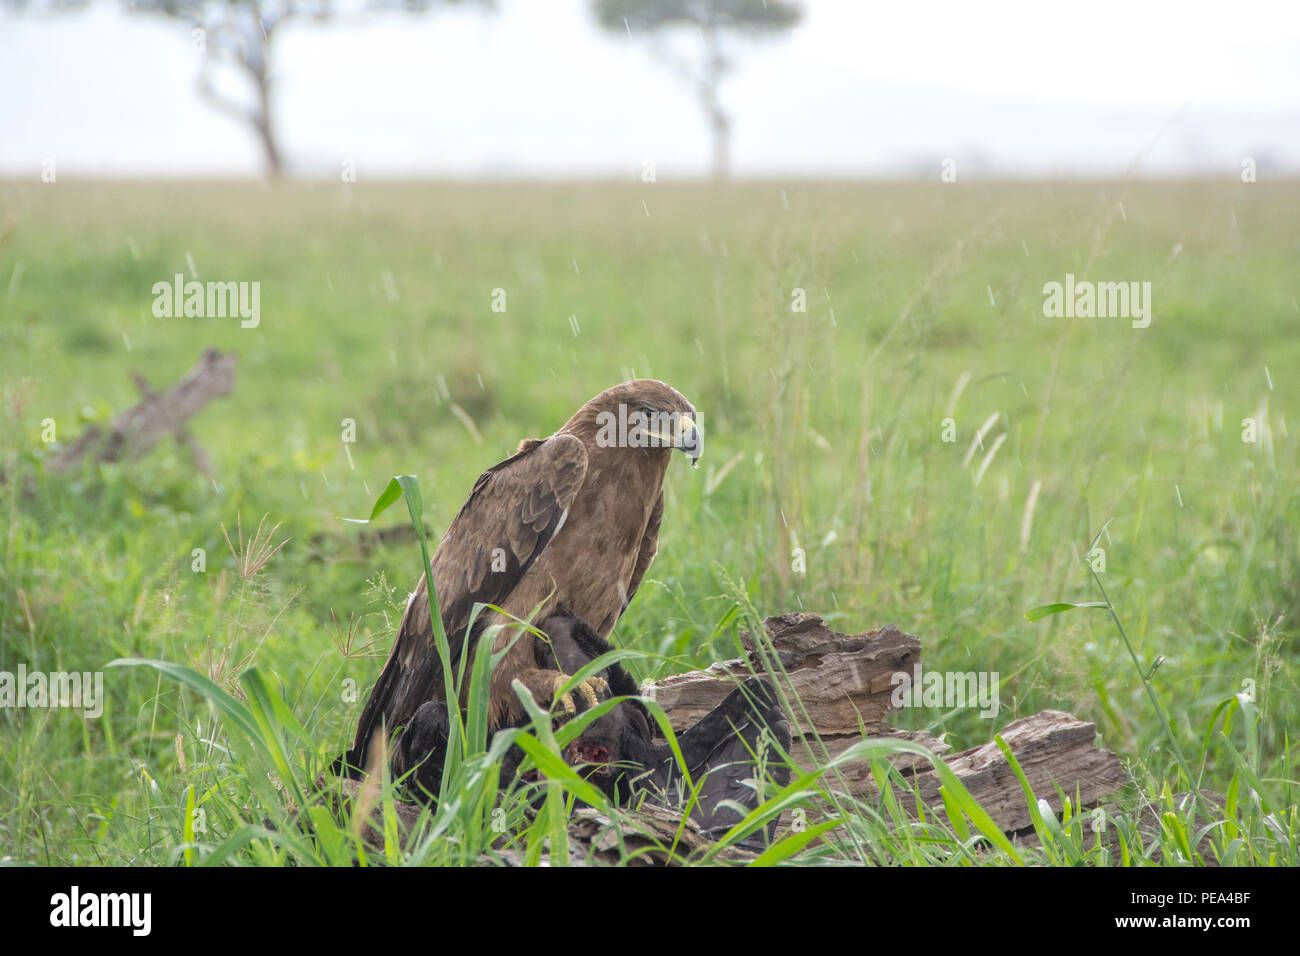 A crowned African Eagle feeding on another bird in the Rains of the Serengeti National park, Tanzania. Stock Photo